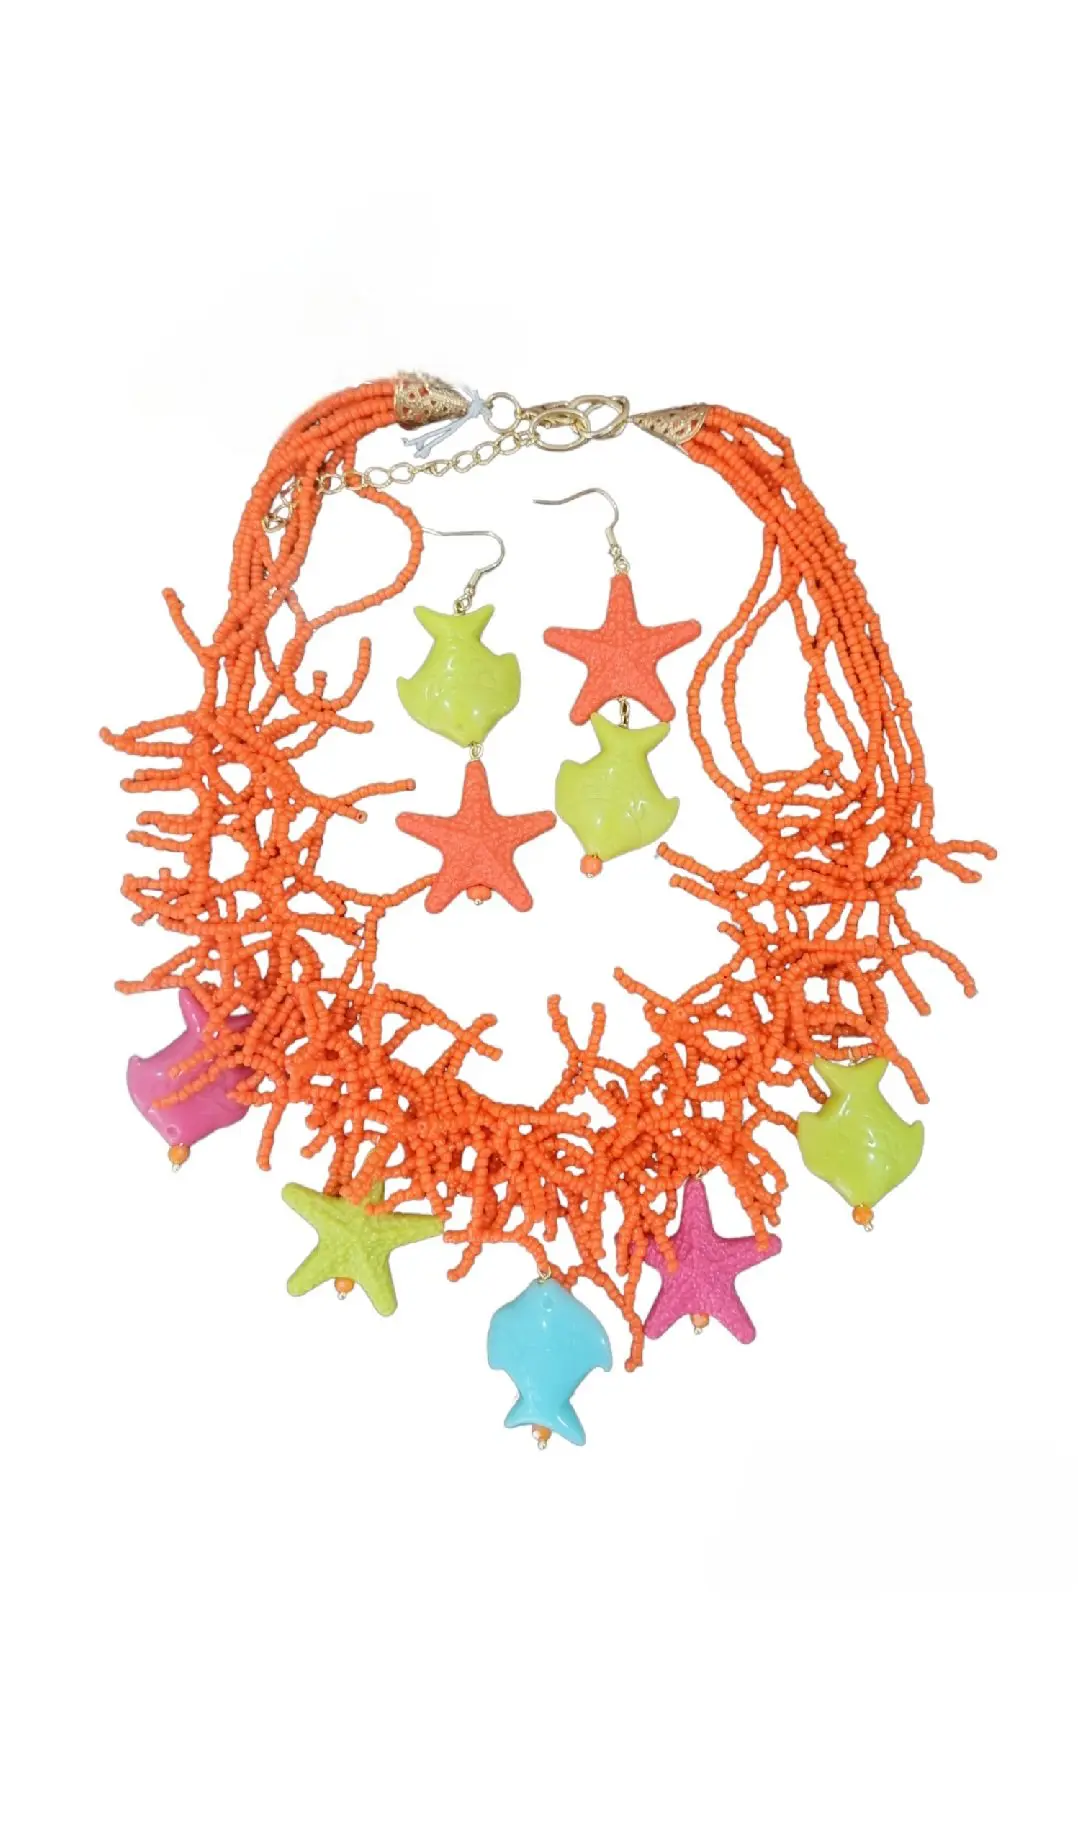 Set of choker necklace and earrings made of orange microbeads and resin stars and fish. Choker length 58cm Earring length 8.5cm Earring weight 6.1g